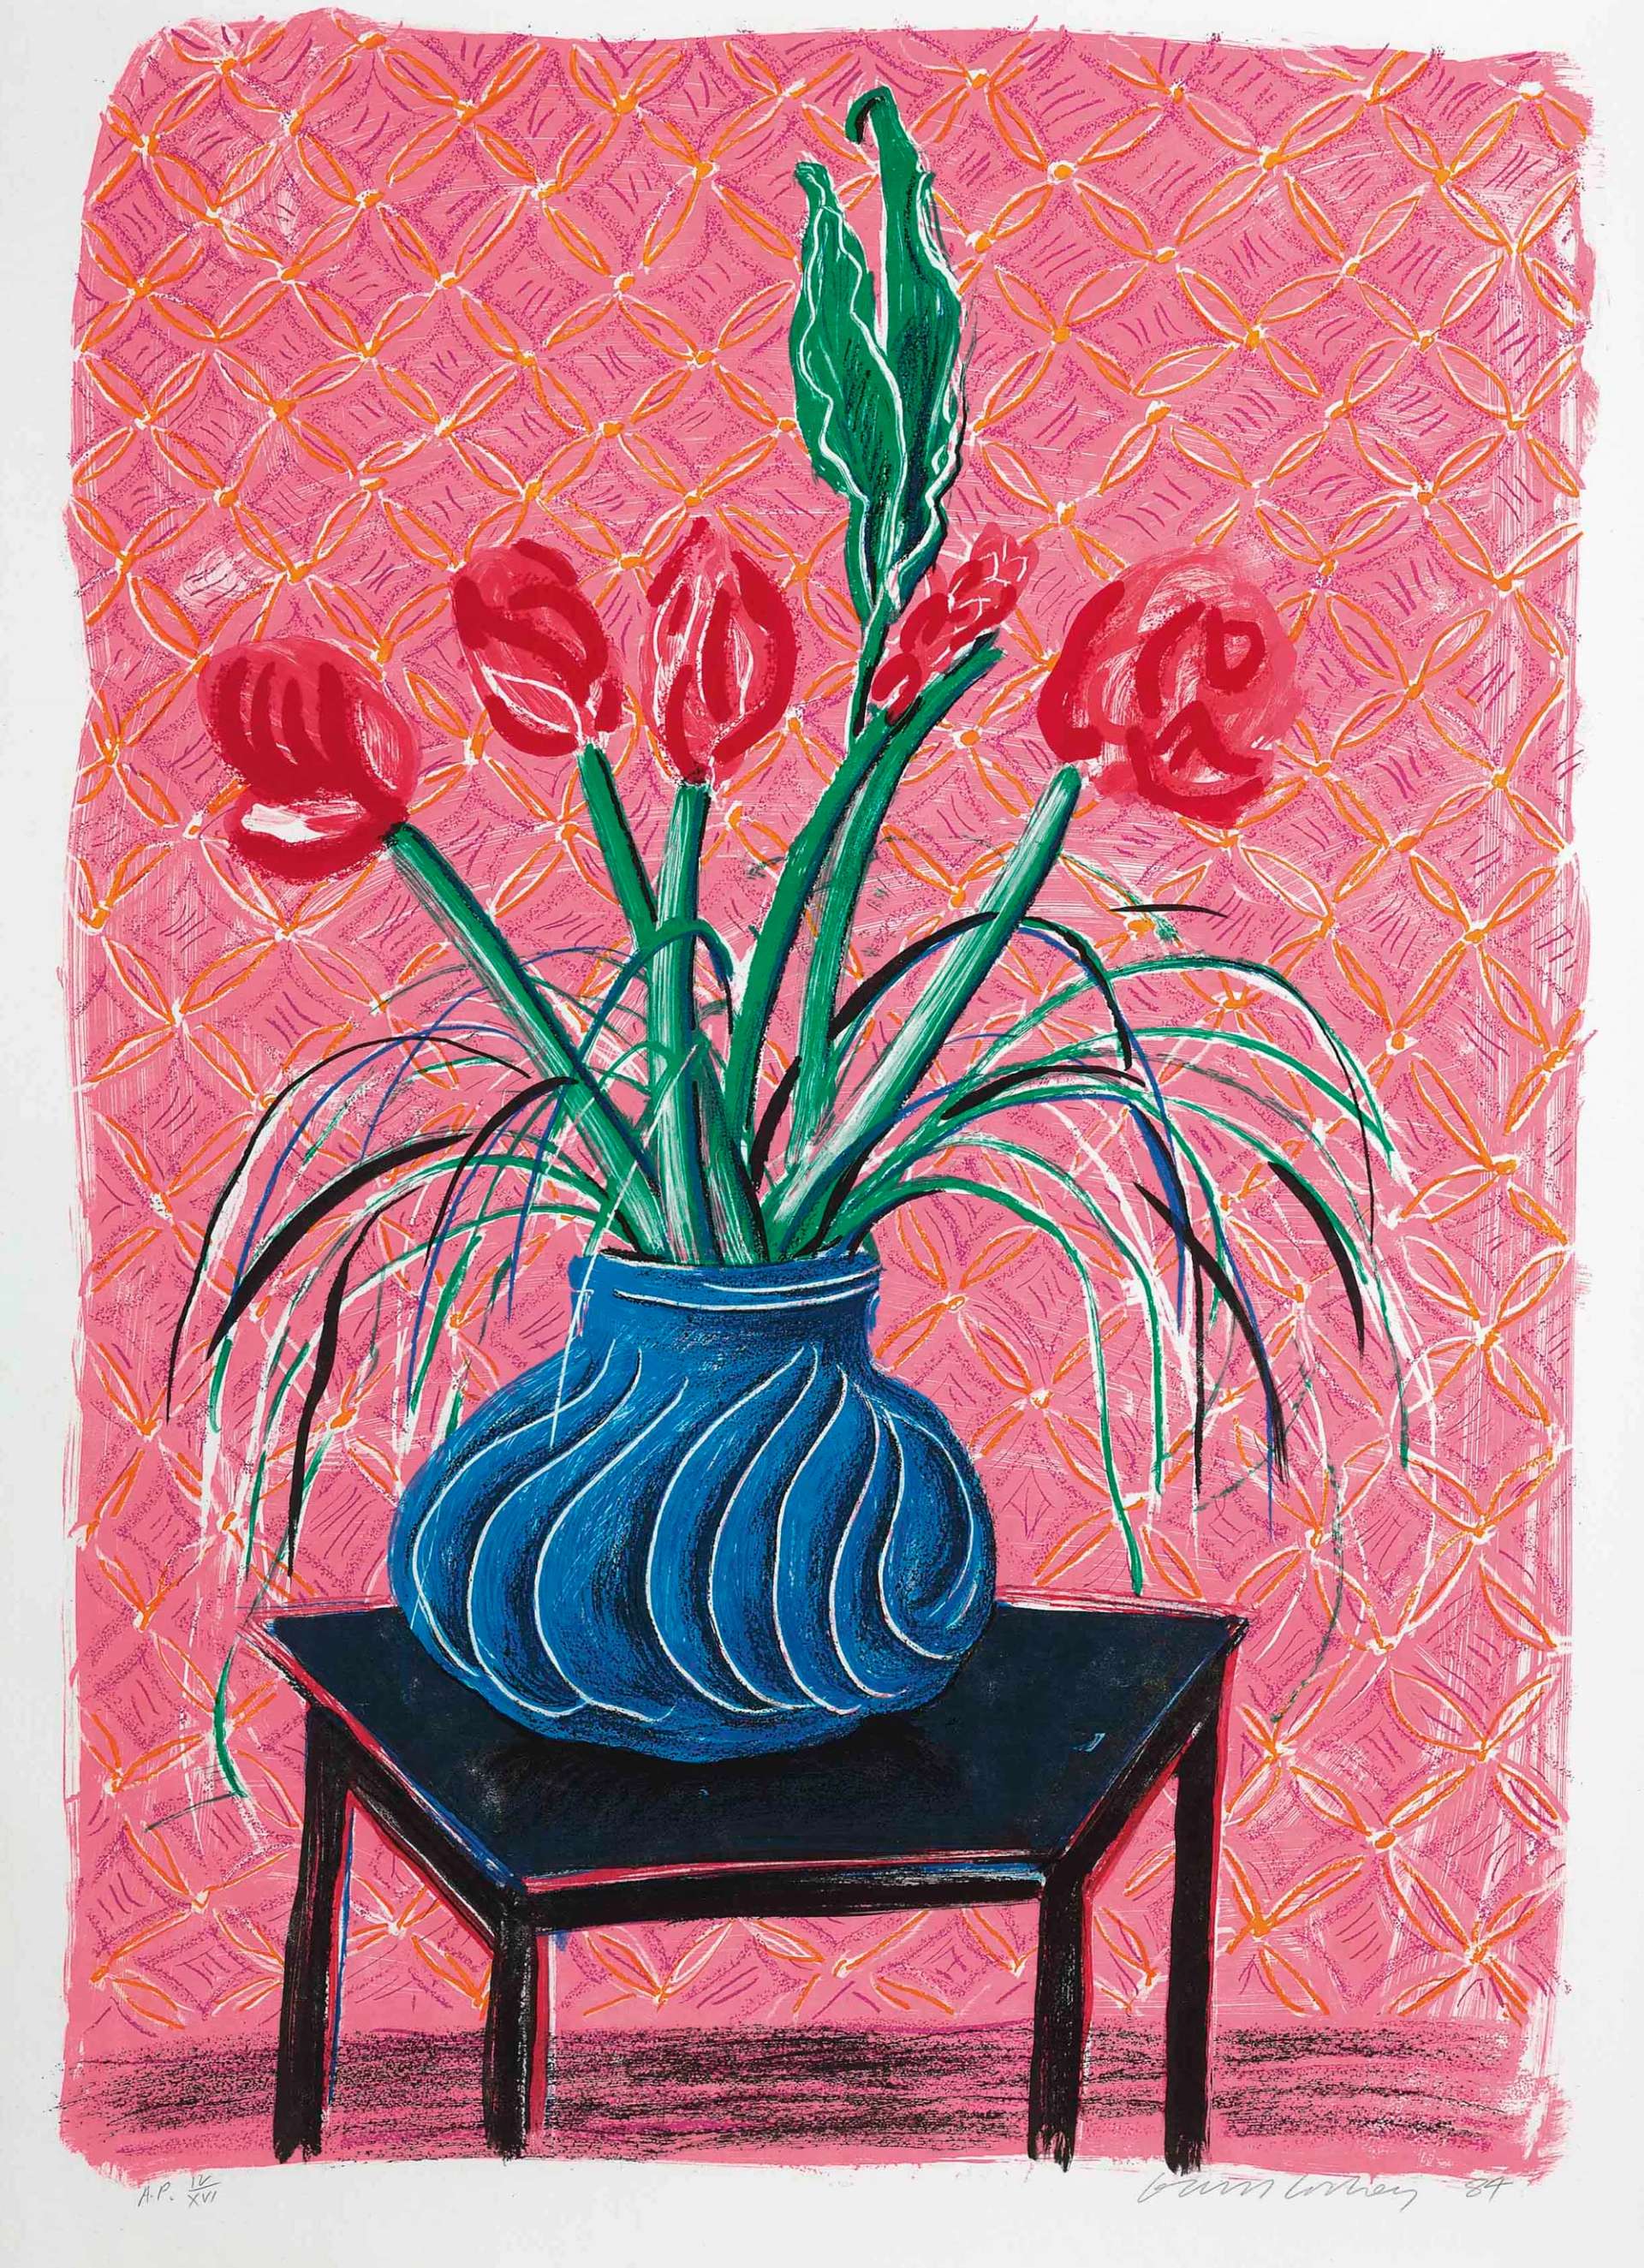 David Hockney's Amaryllis In Vase. A print of five red flowers in a blue vase on a table against pink walls.